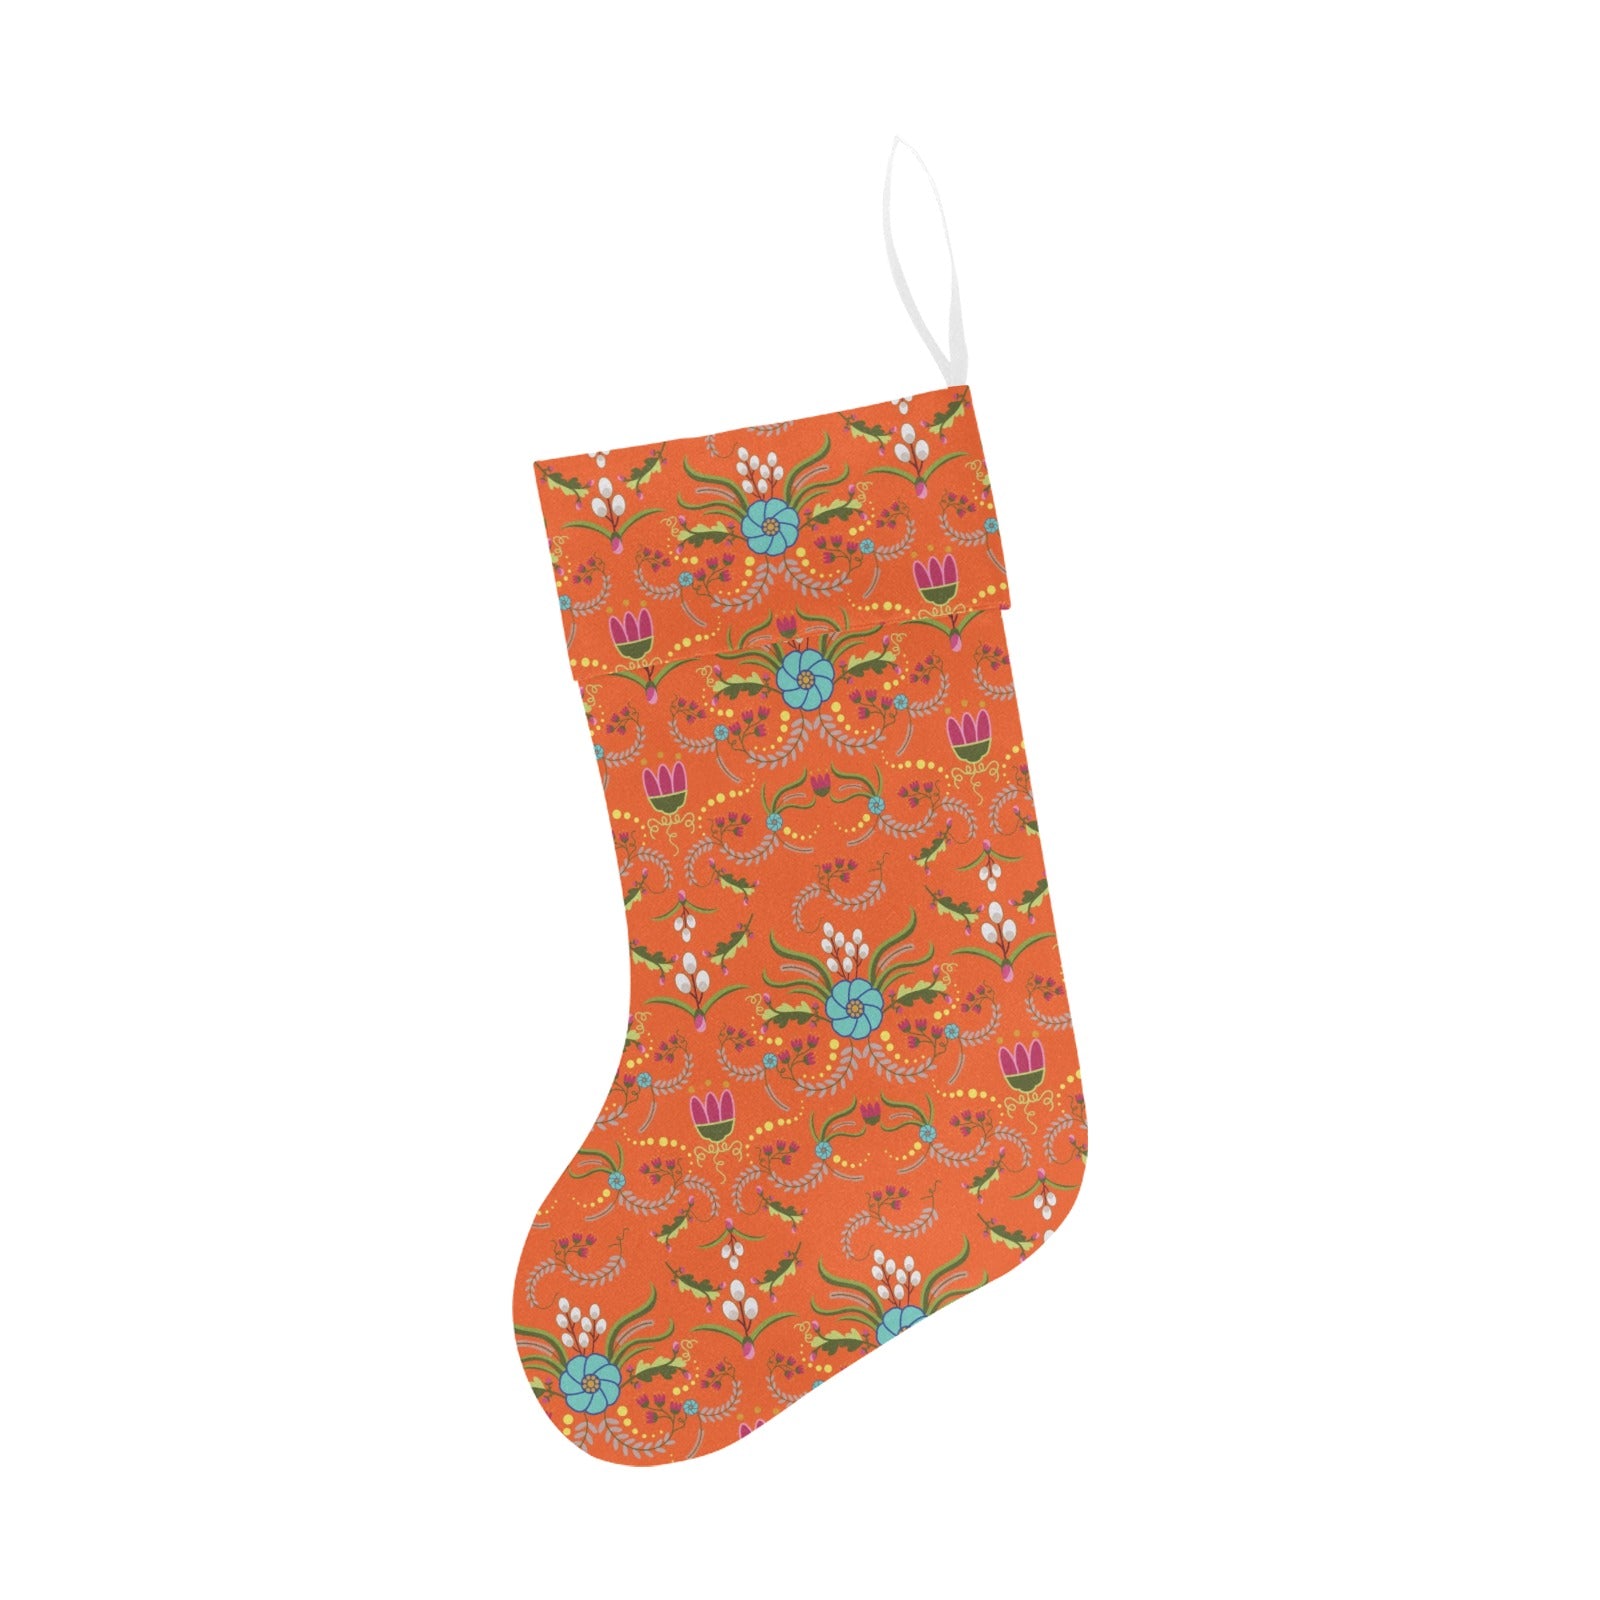 First Bloom Carrots Christmas Stocking